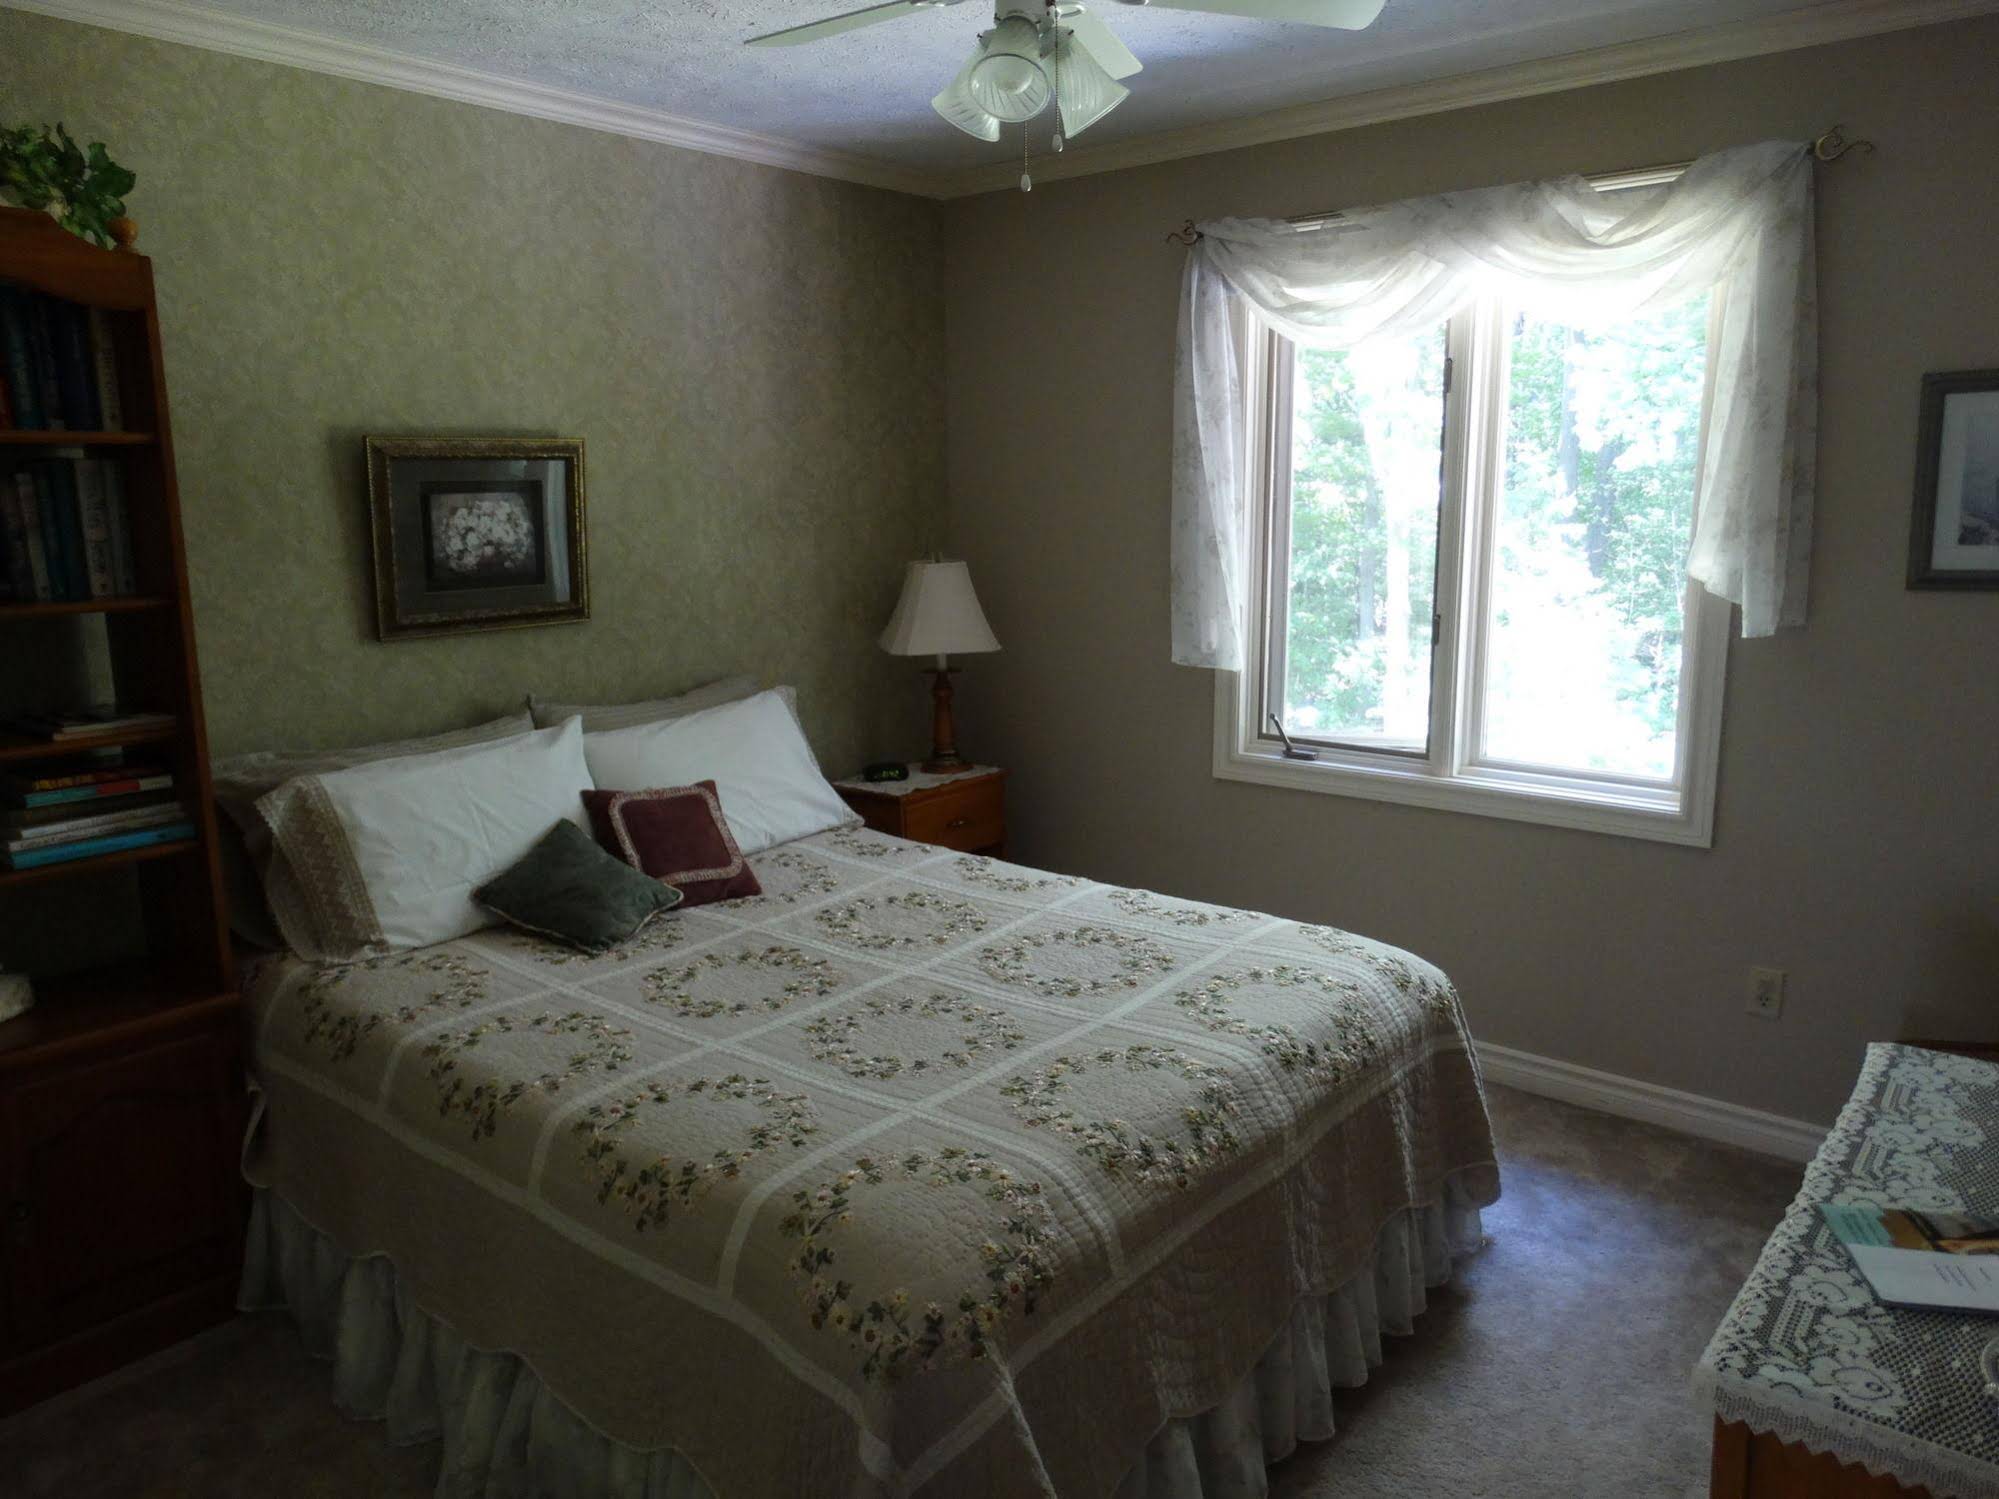 Tranquil Moments Bed & Breakfast 1 stars